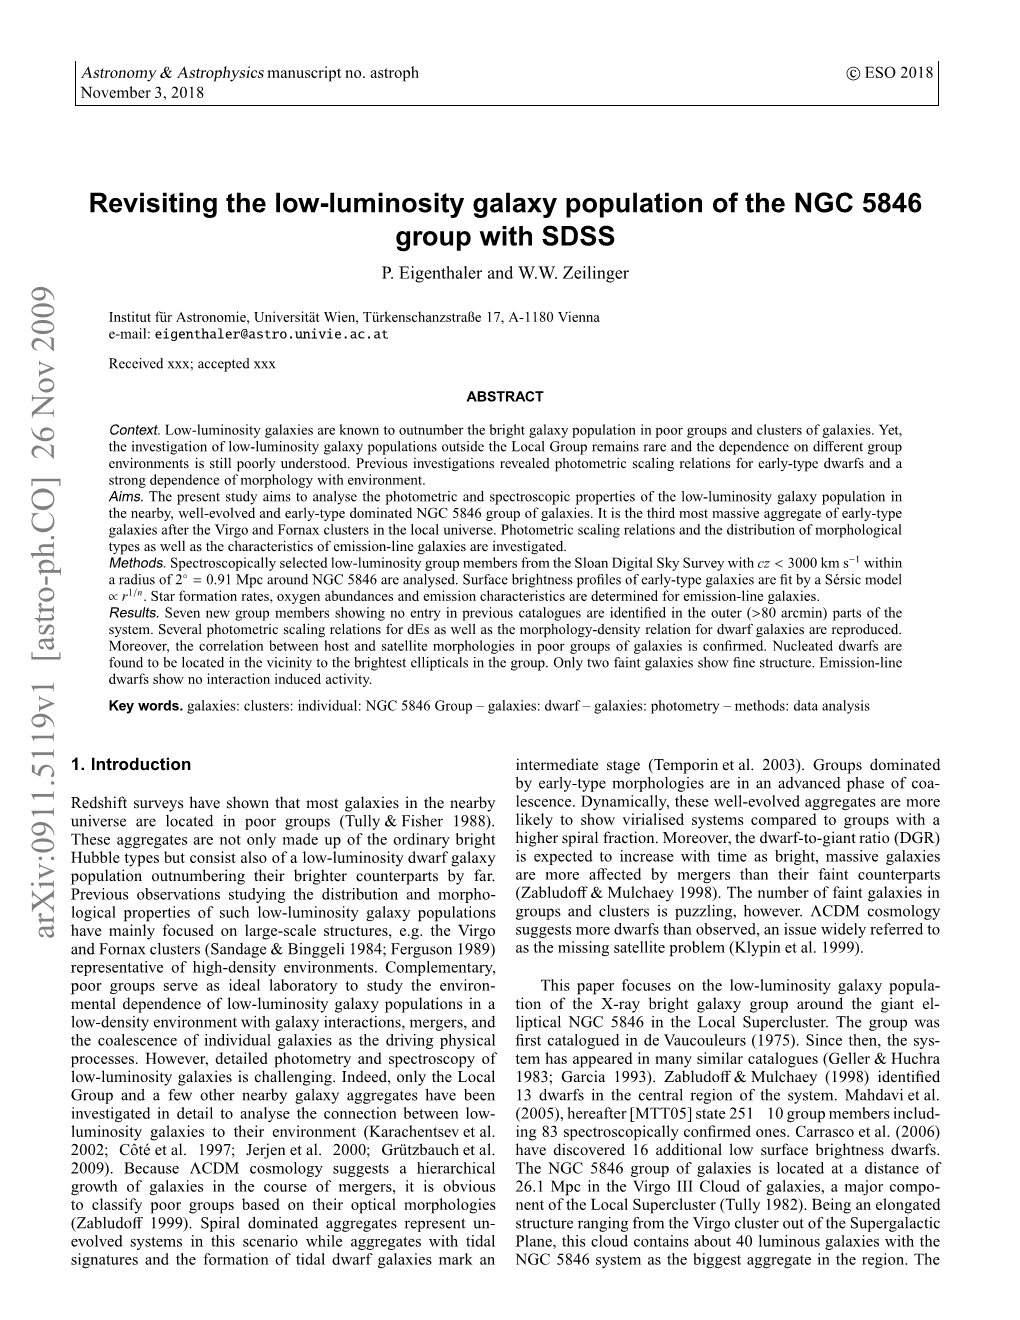 Revisiting the Low-Luminosity Galaxy Population of the NGC 5846 Group